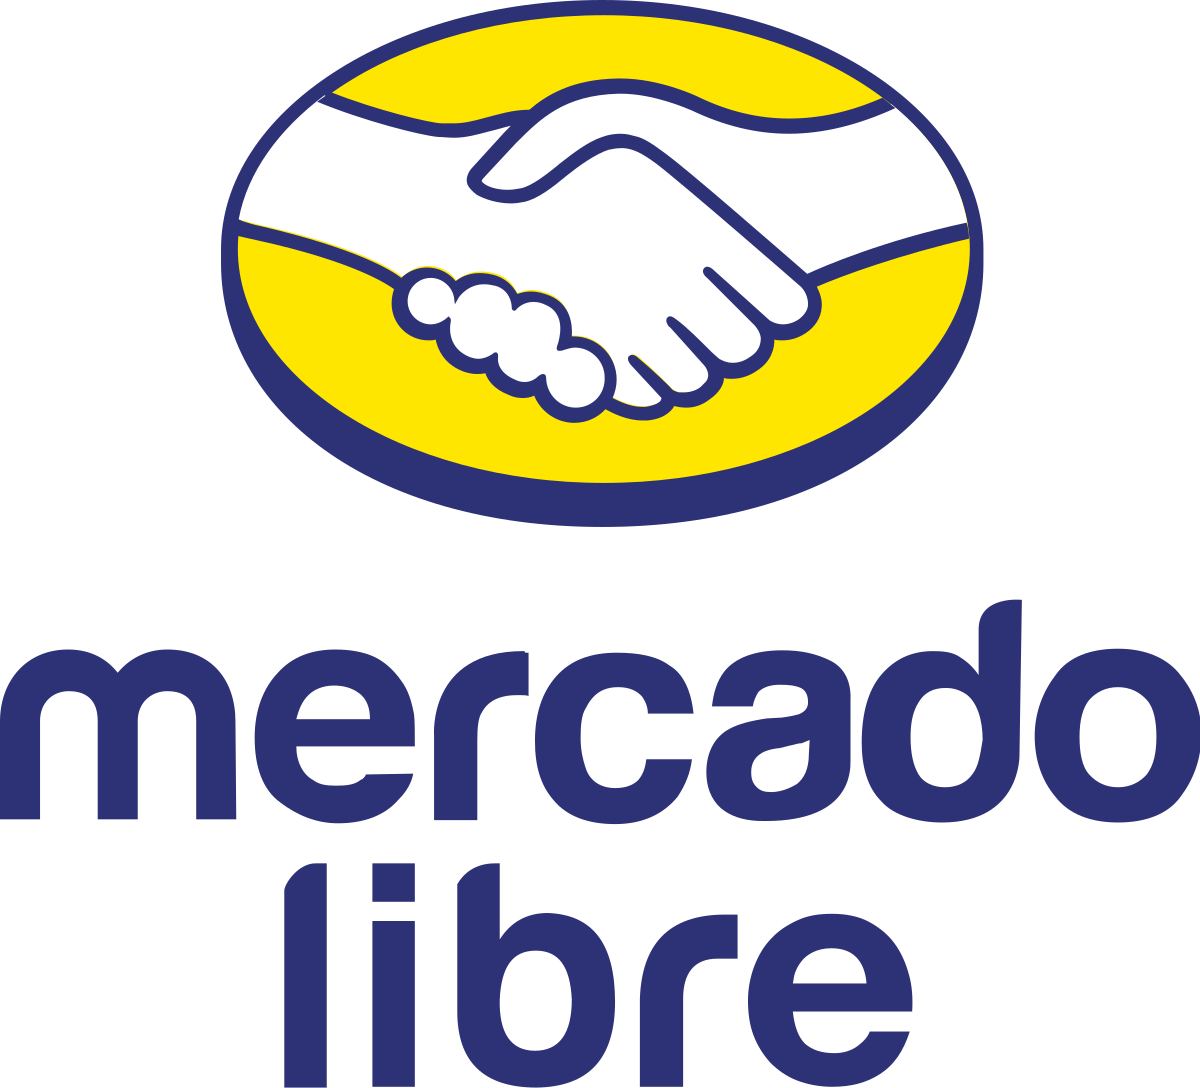 How to Buy from Mercado Libre Argentina in Canada